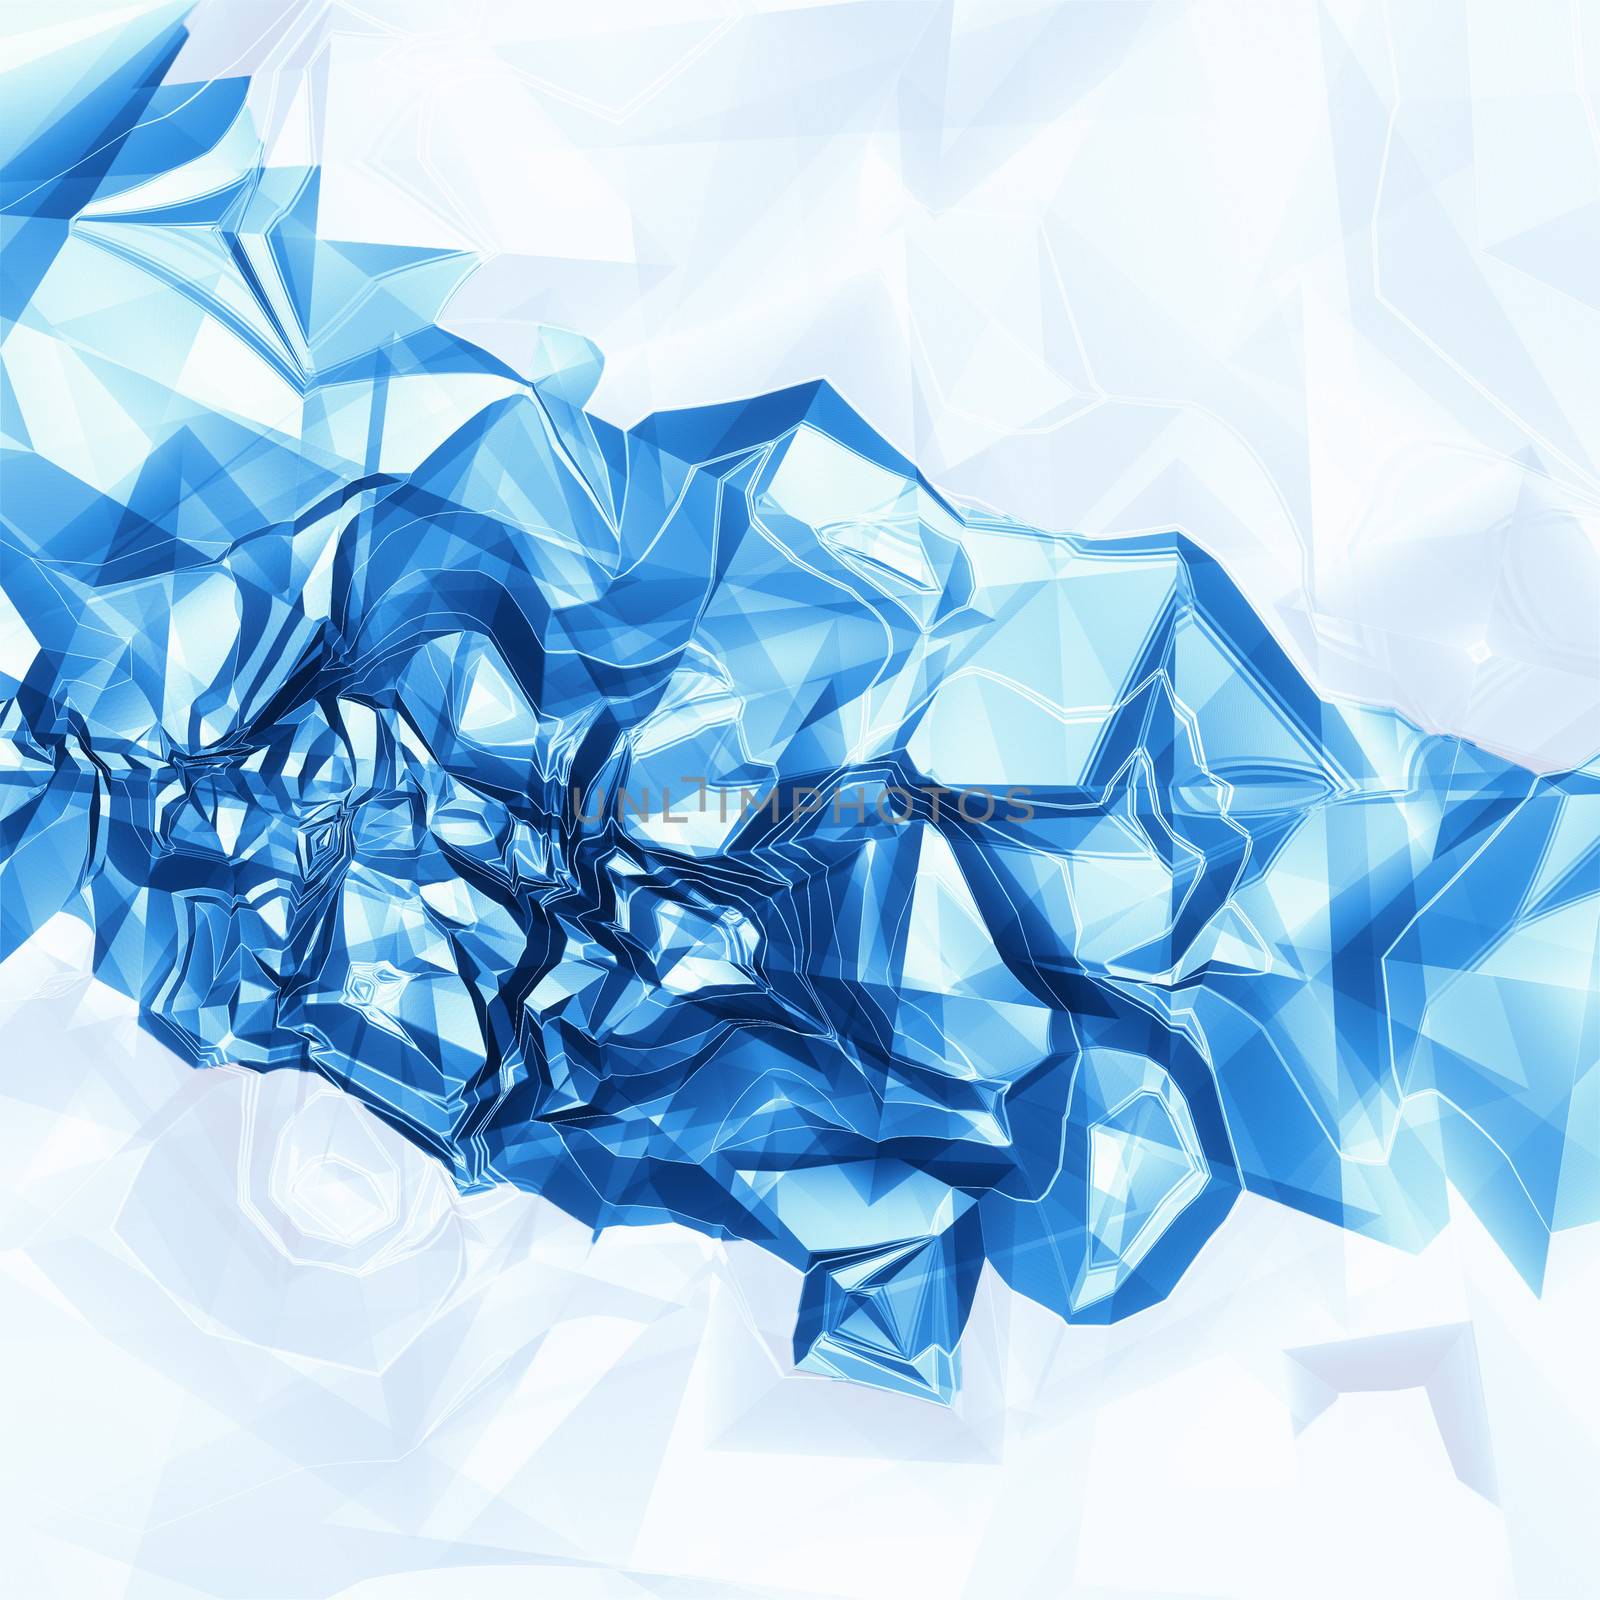 digital ice abstract background illustration